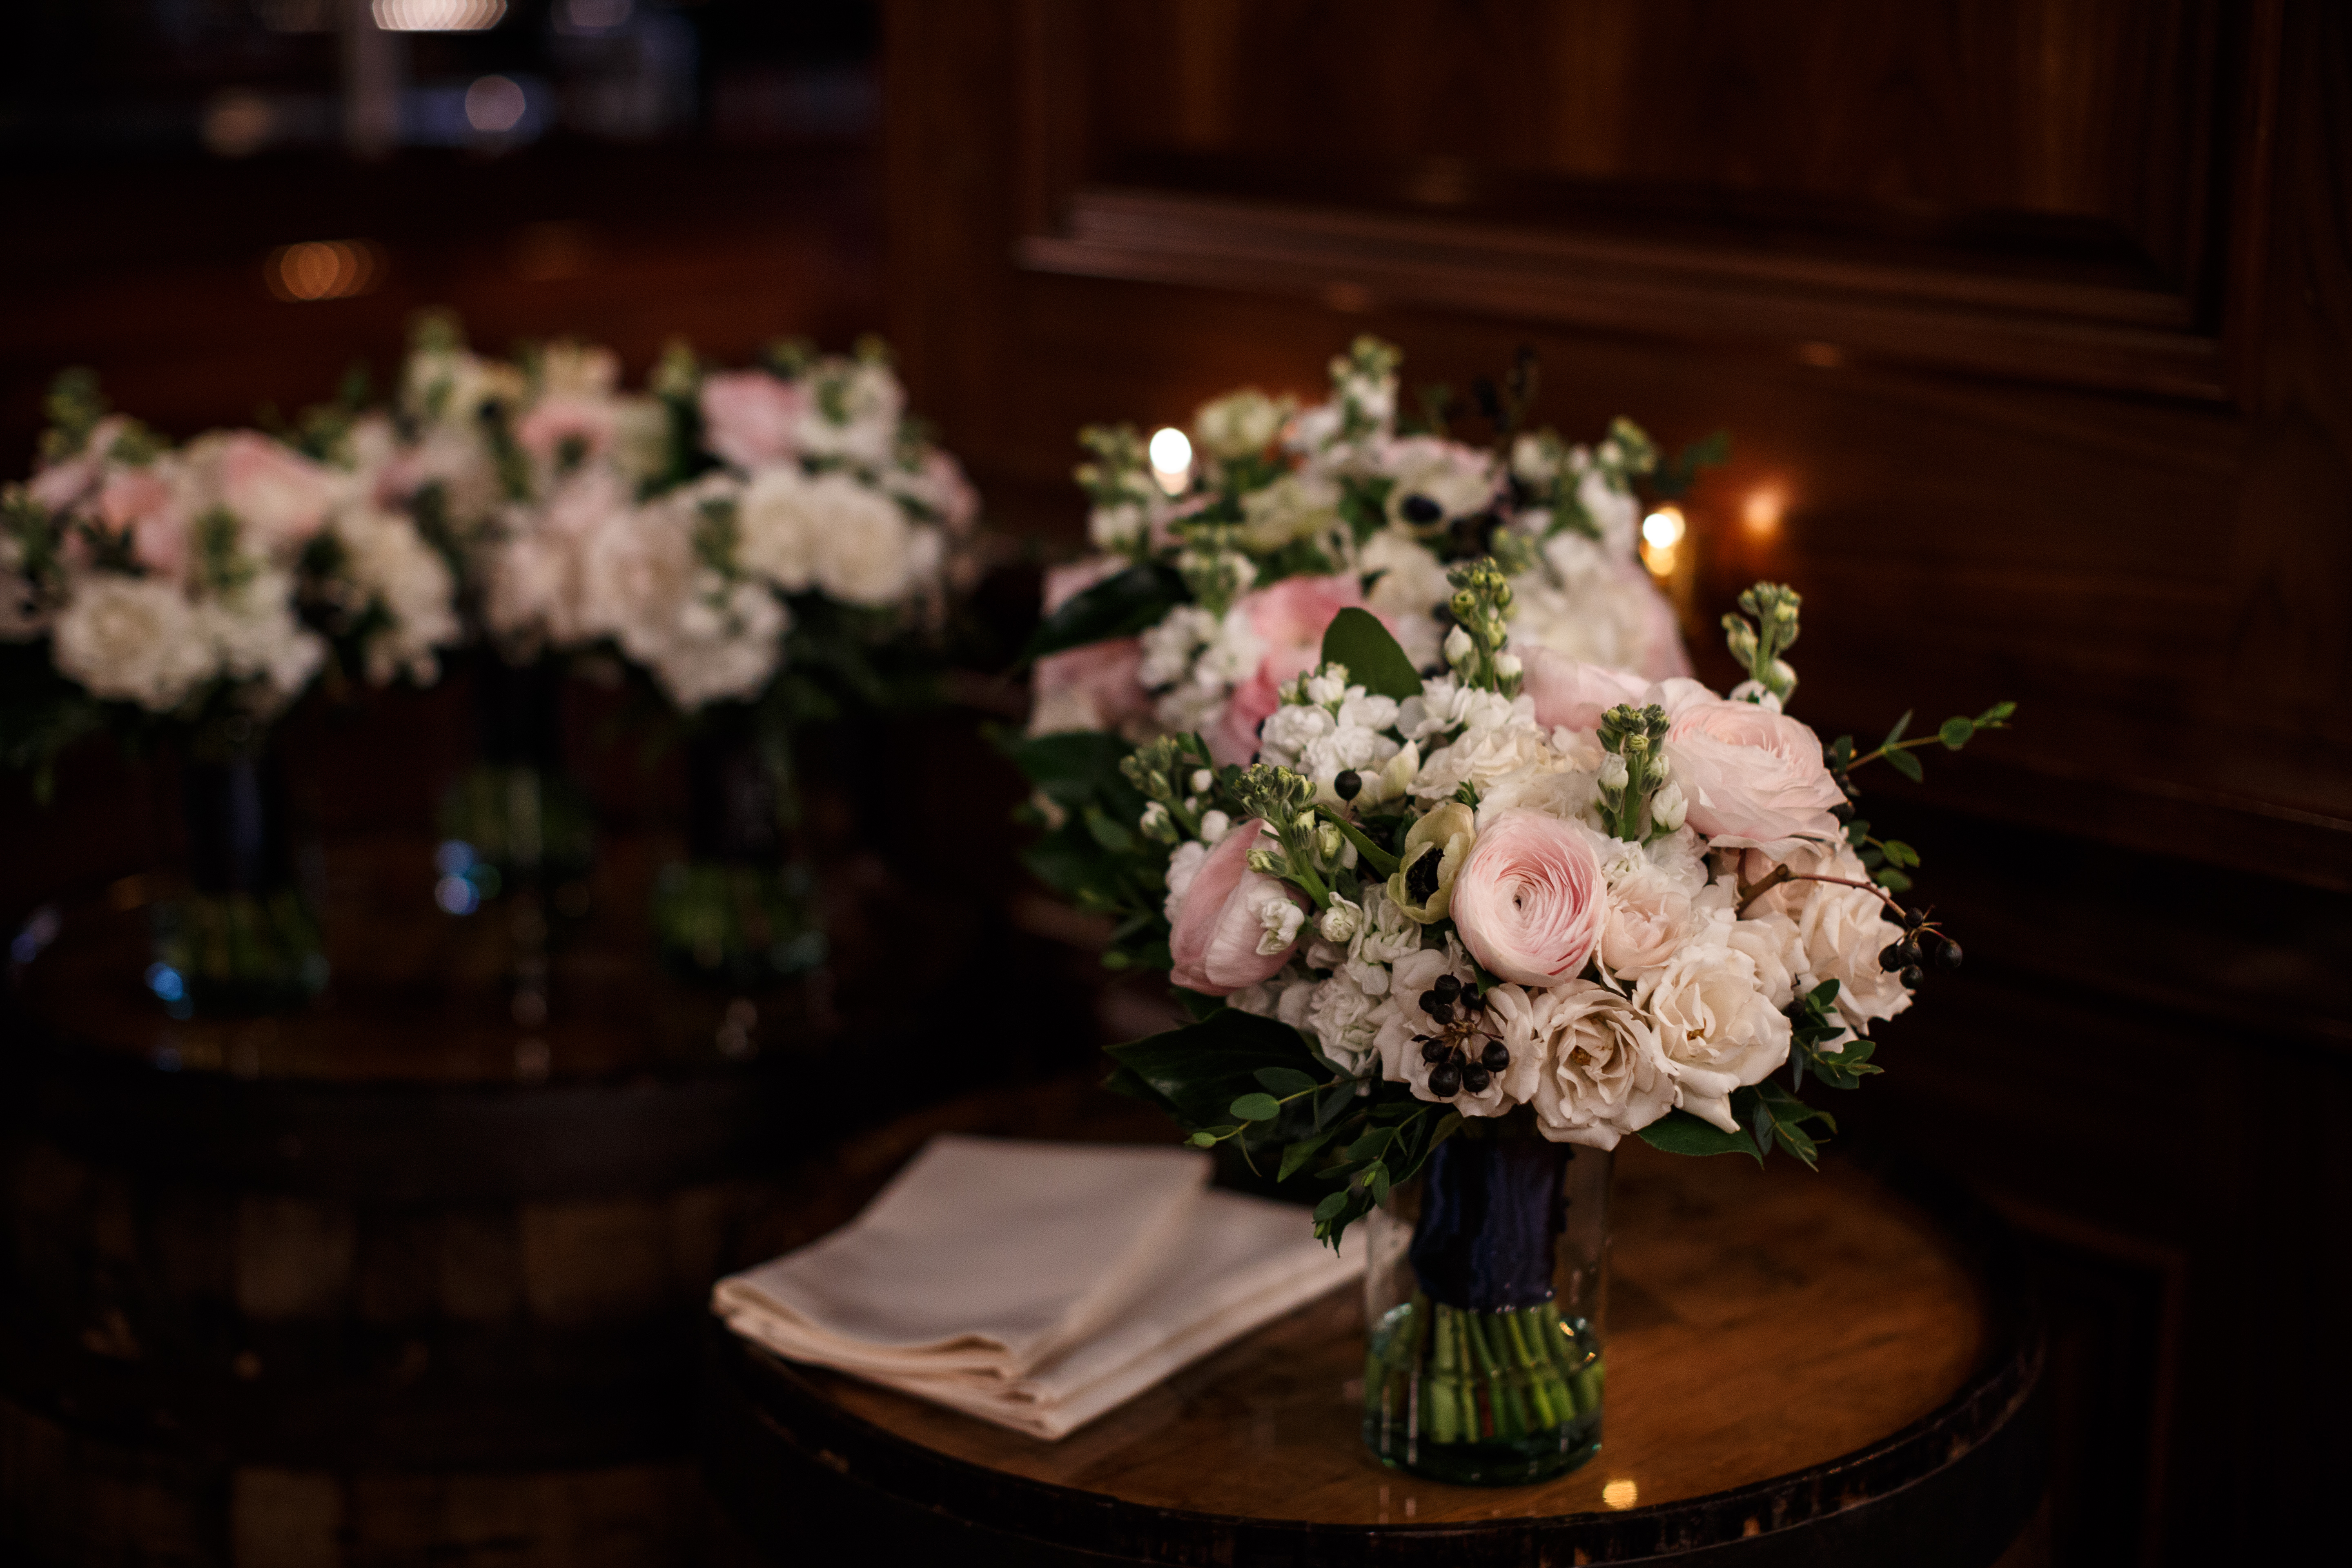 Some timeless bouquets at a spring wedding at Revolution Brewing, with hellebores, ranunculus, anemone, and spray roses.